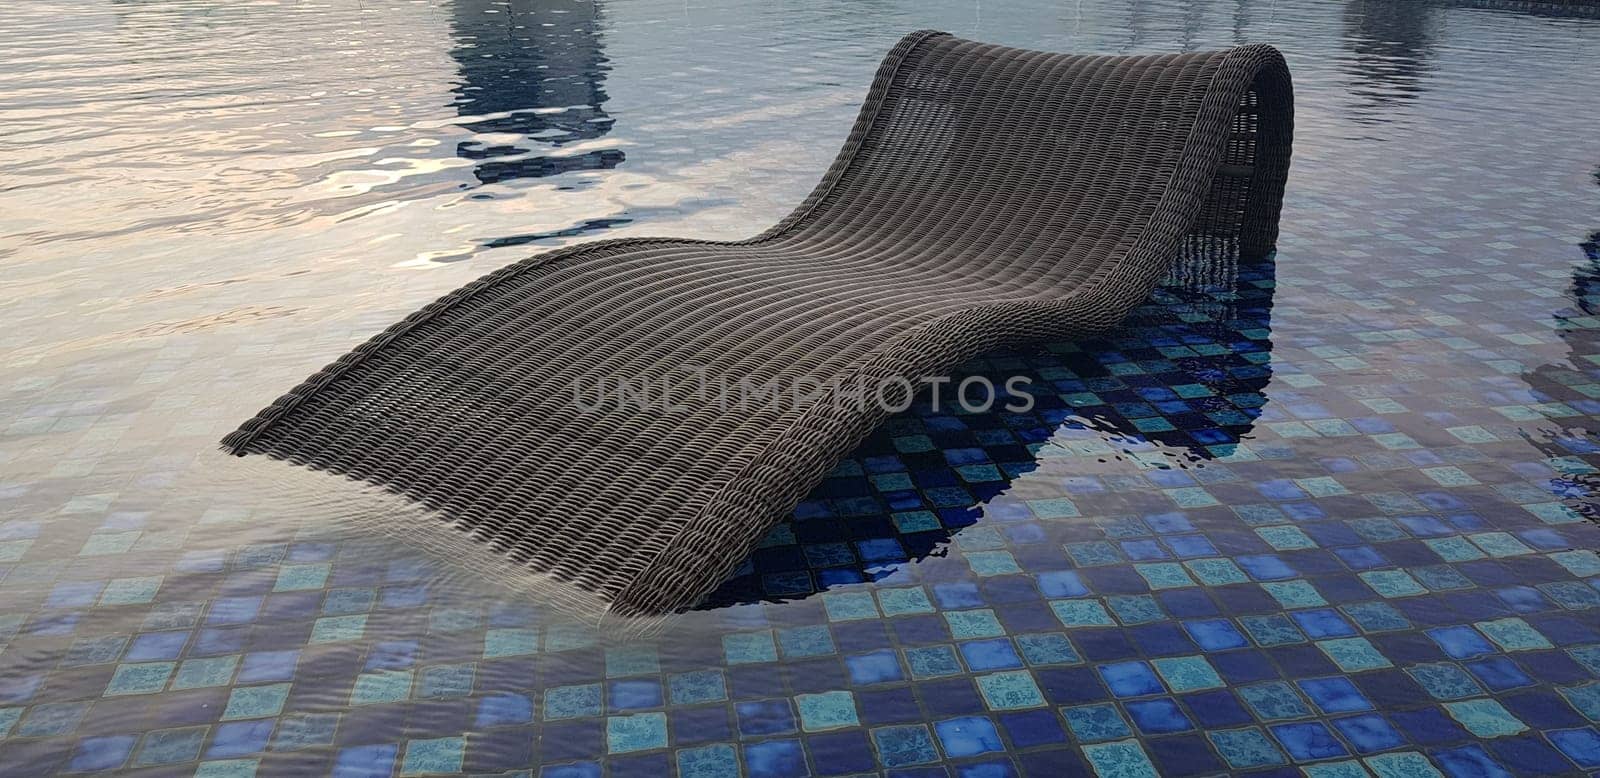 relax deck chair by the blue pool at swimming pool in luxury spa resort or villa Tourism industry crisis after covid 19 coronavirus pandemic Travel lifestyle on family summer vacation